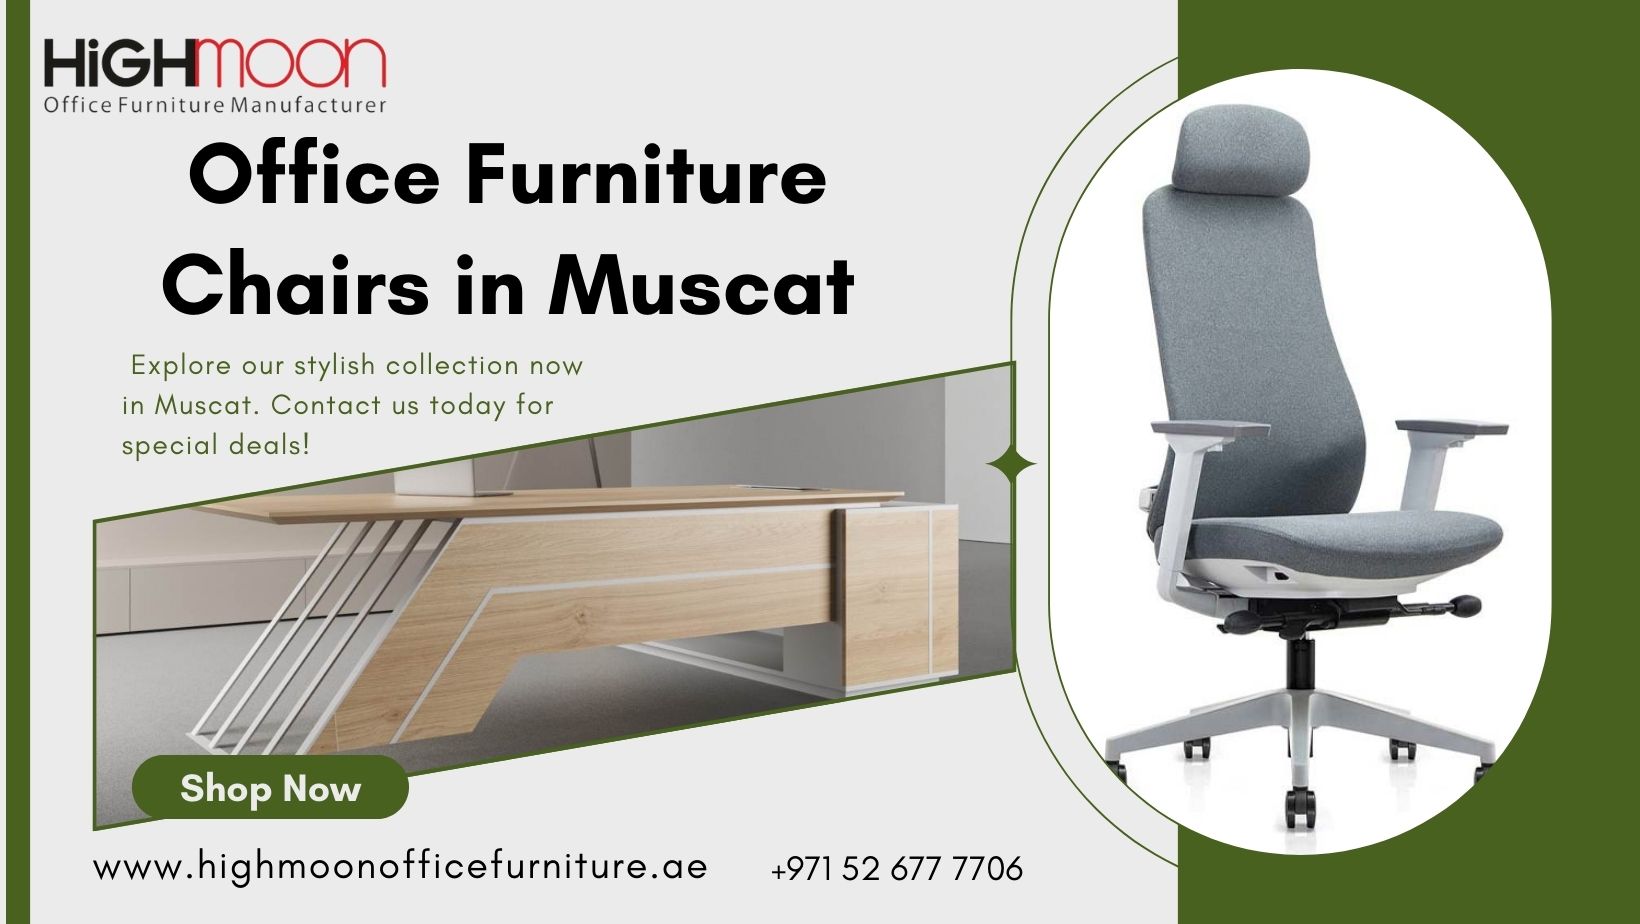 Office Furniture Chairs in Muscat